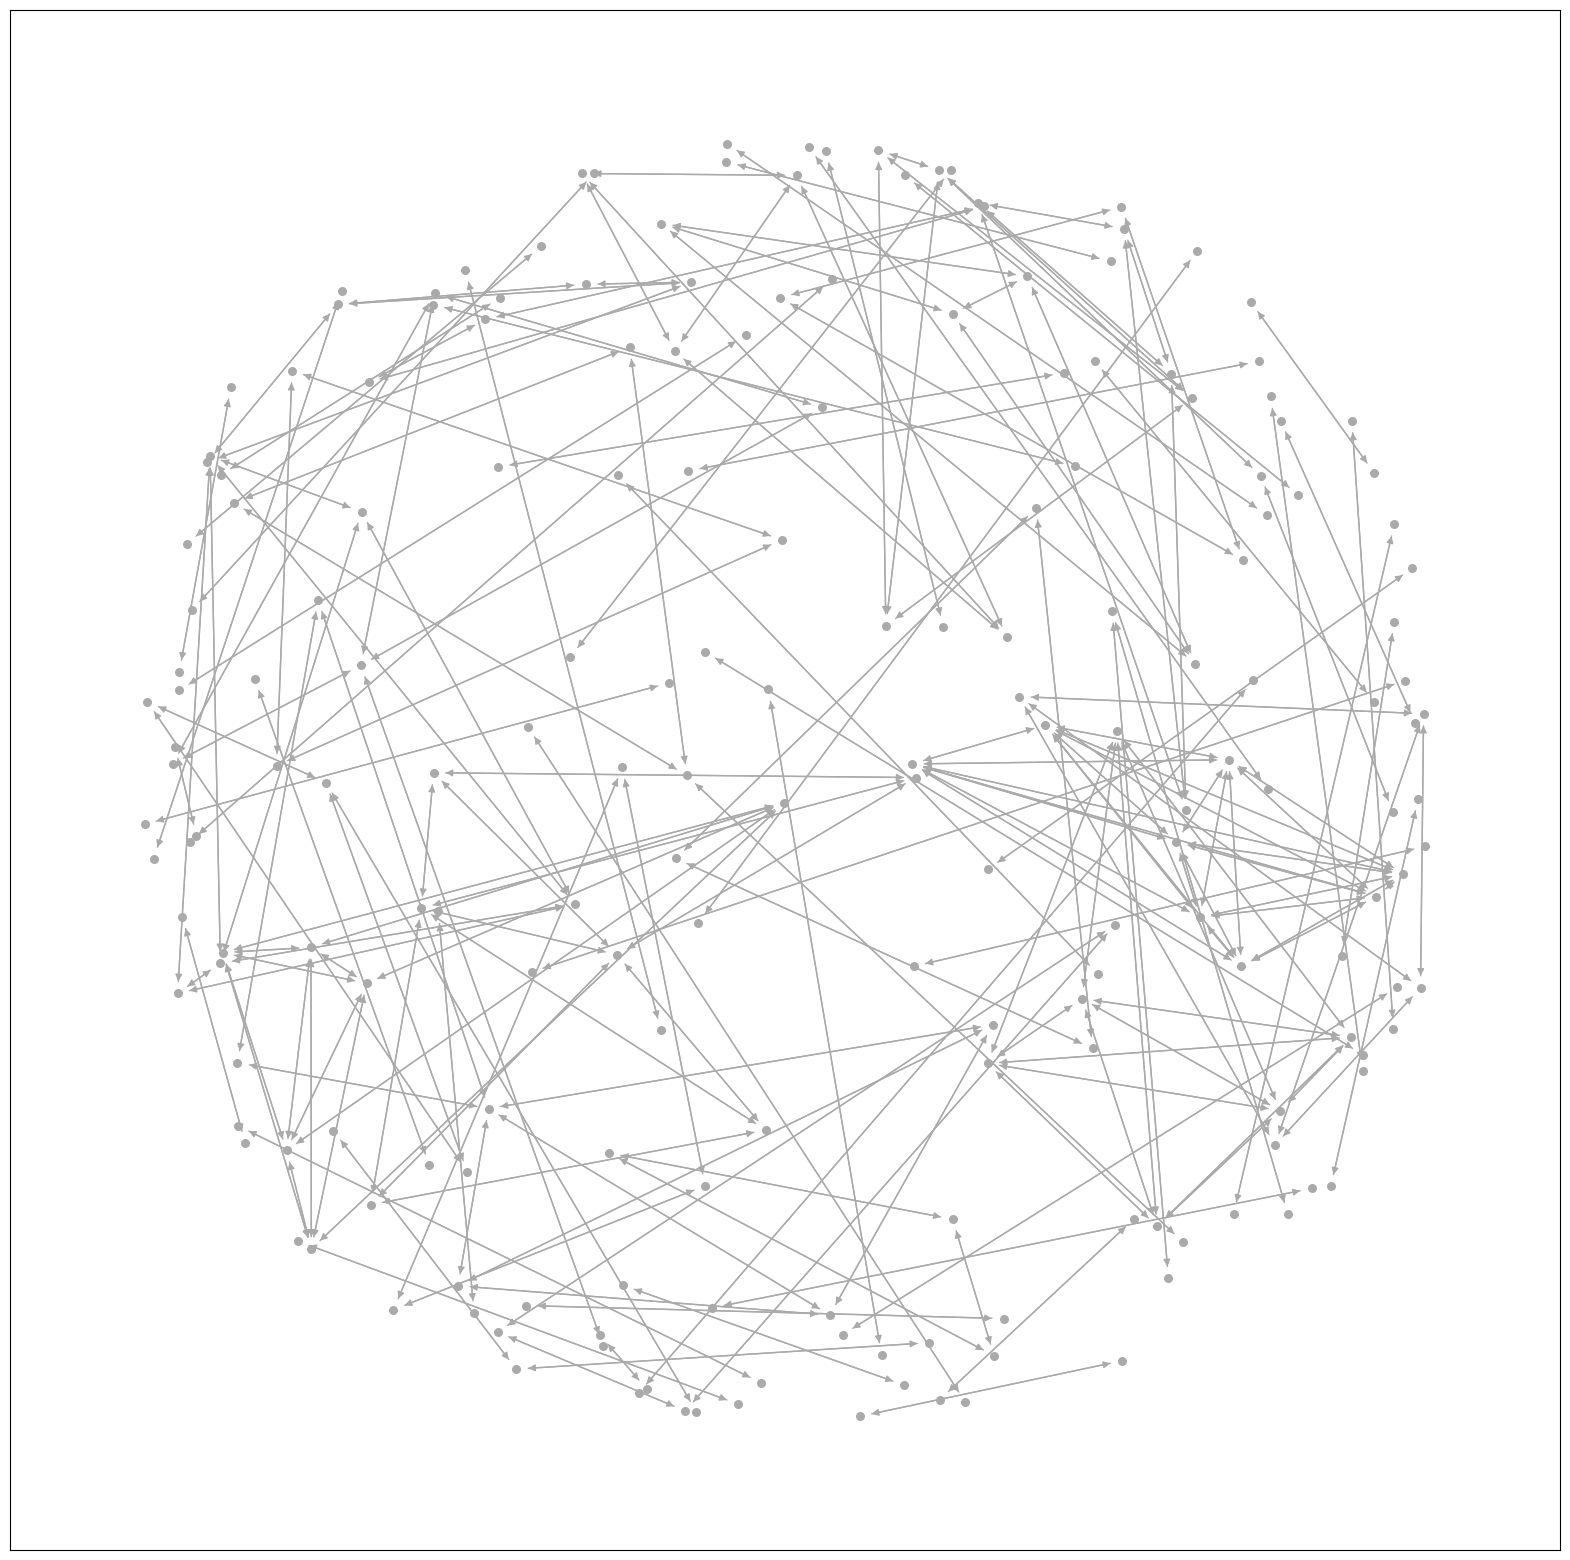 Visualizing the network